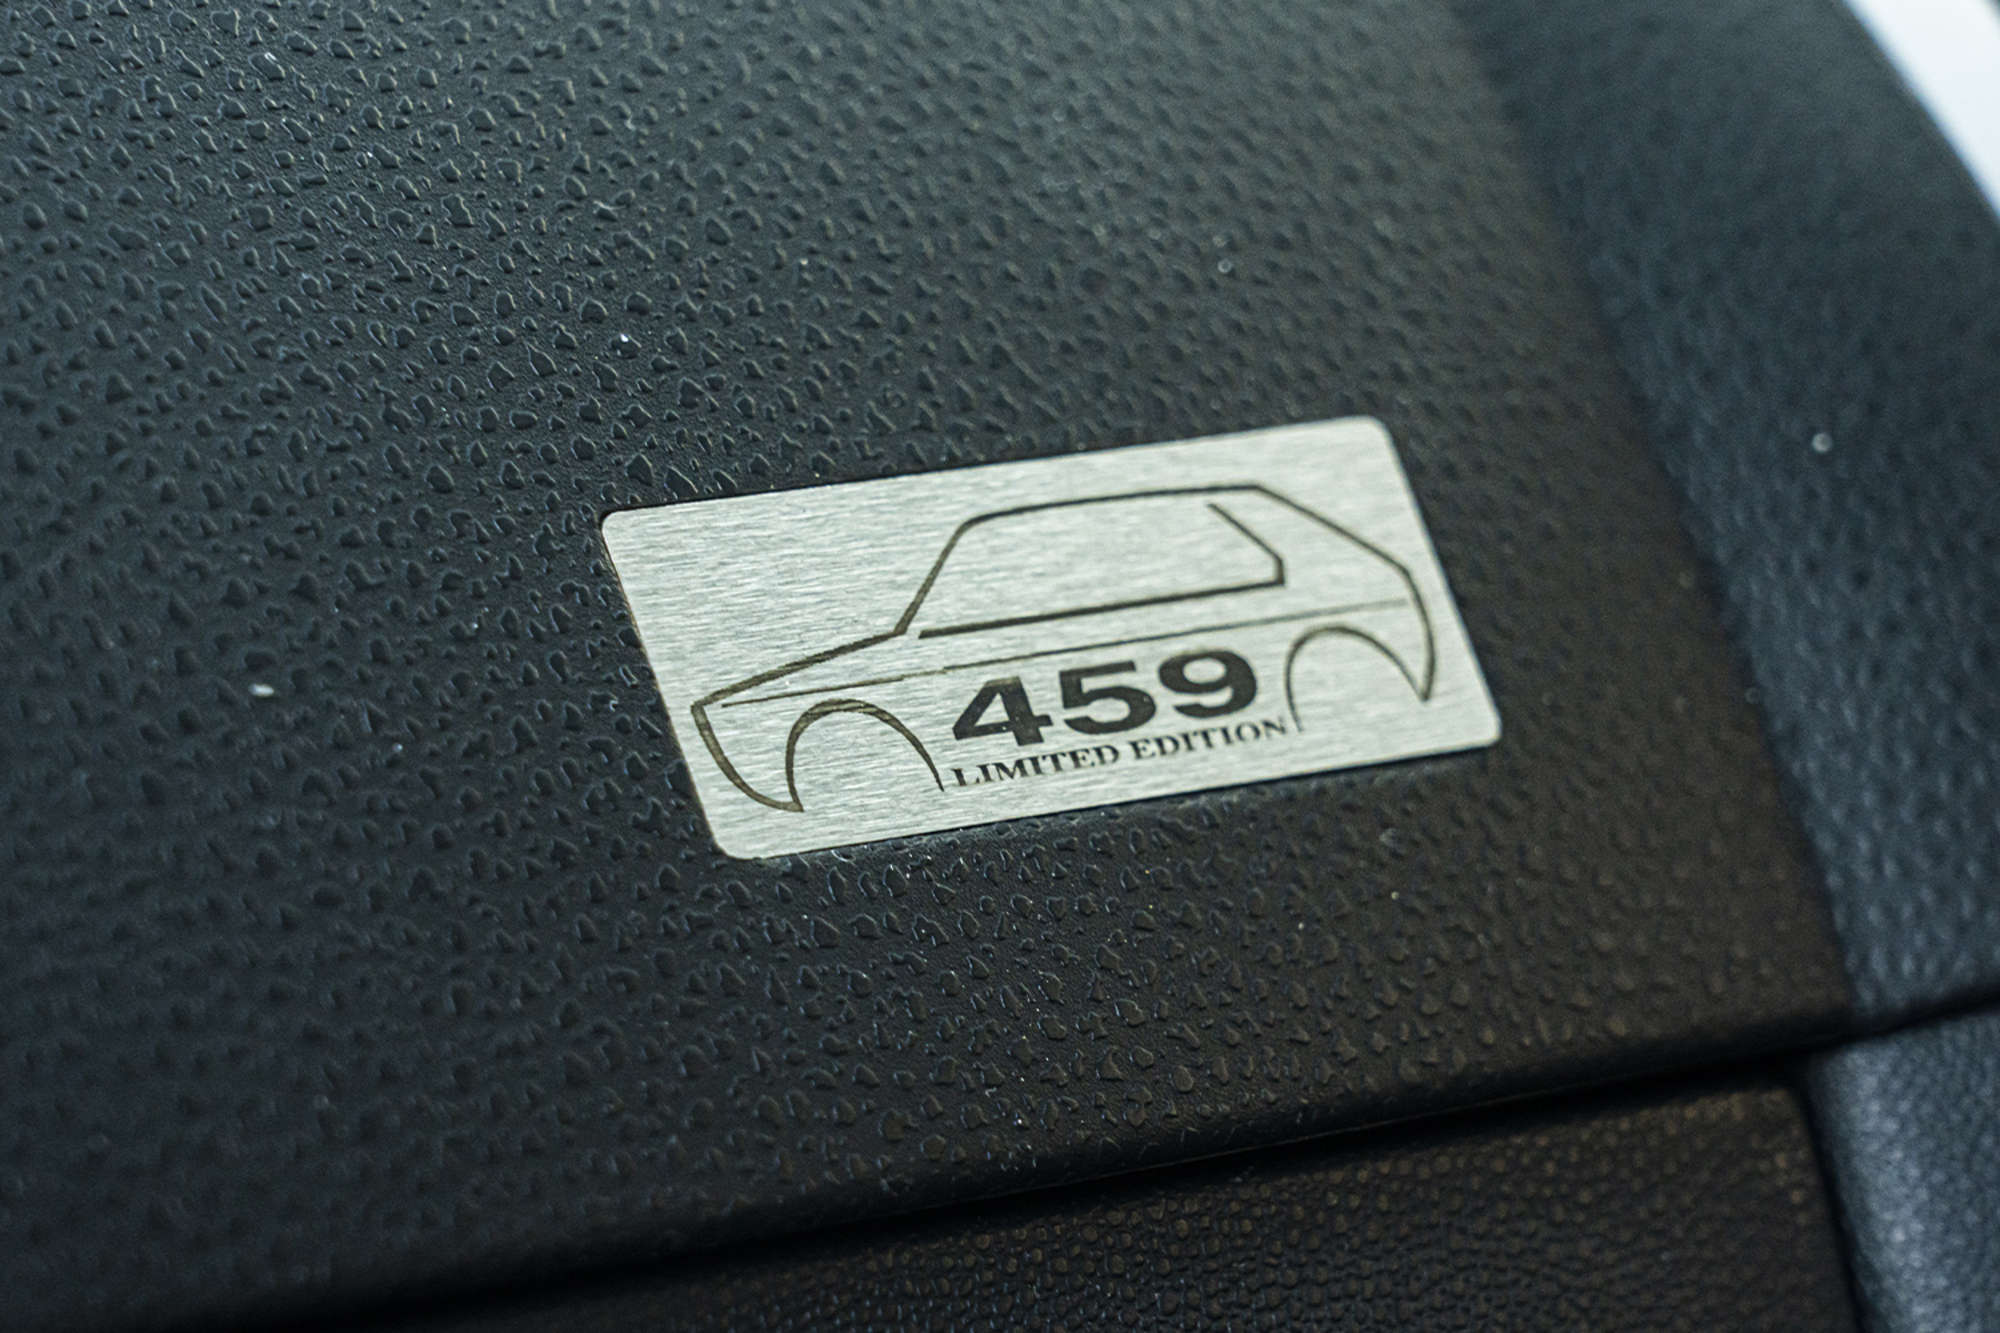 459 Limited Edition